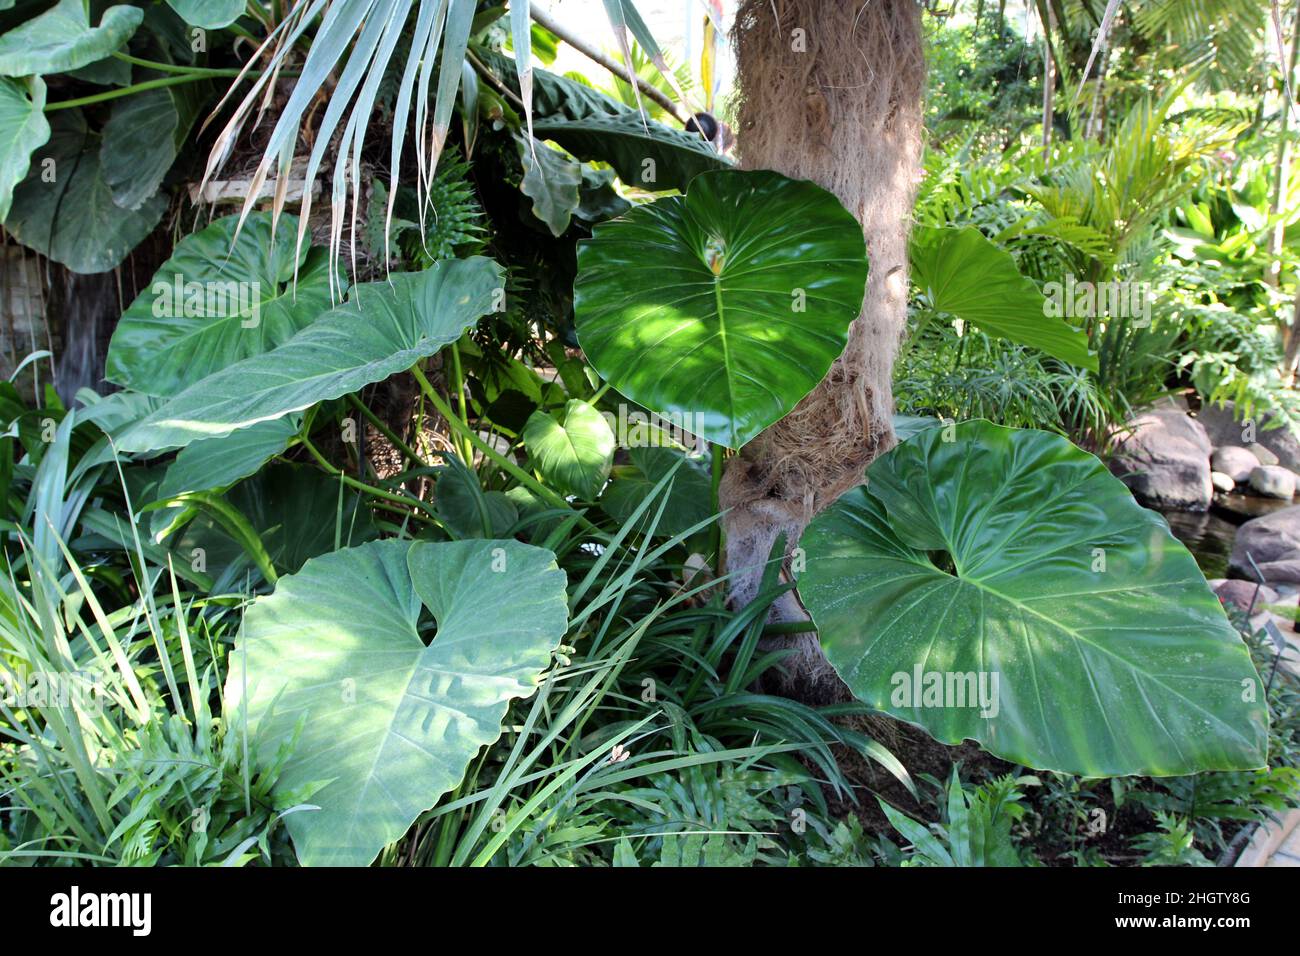 A Philodendron Plant with large Leaves and ferns growing in front of an Old Man Palm tree Stock Photo